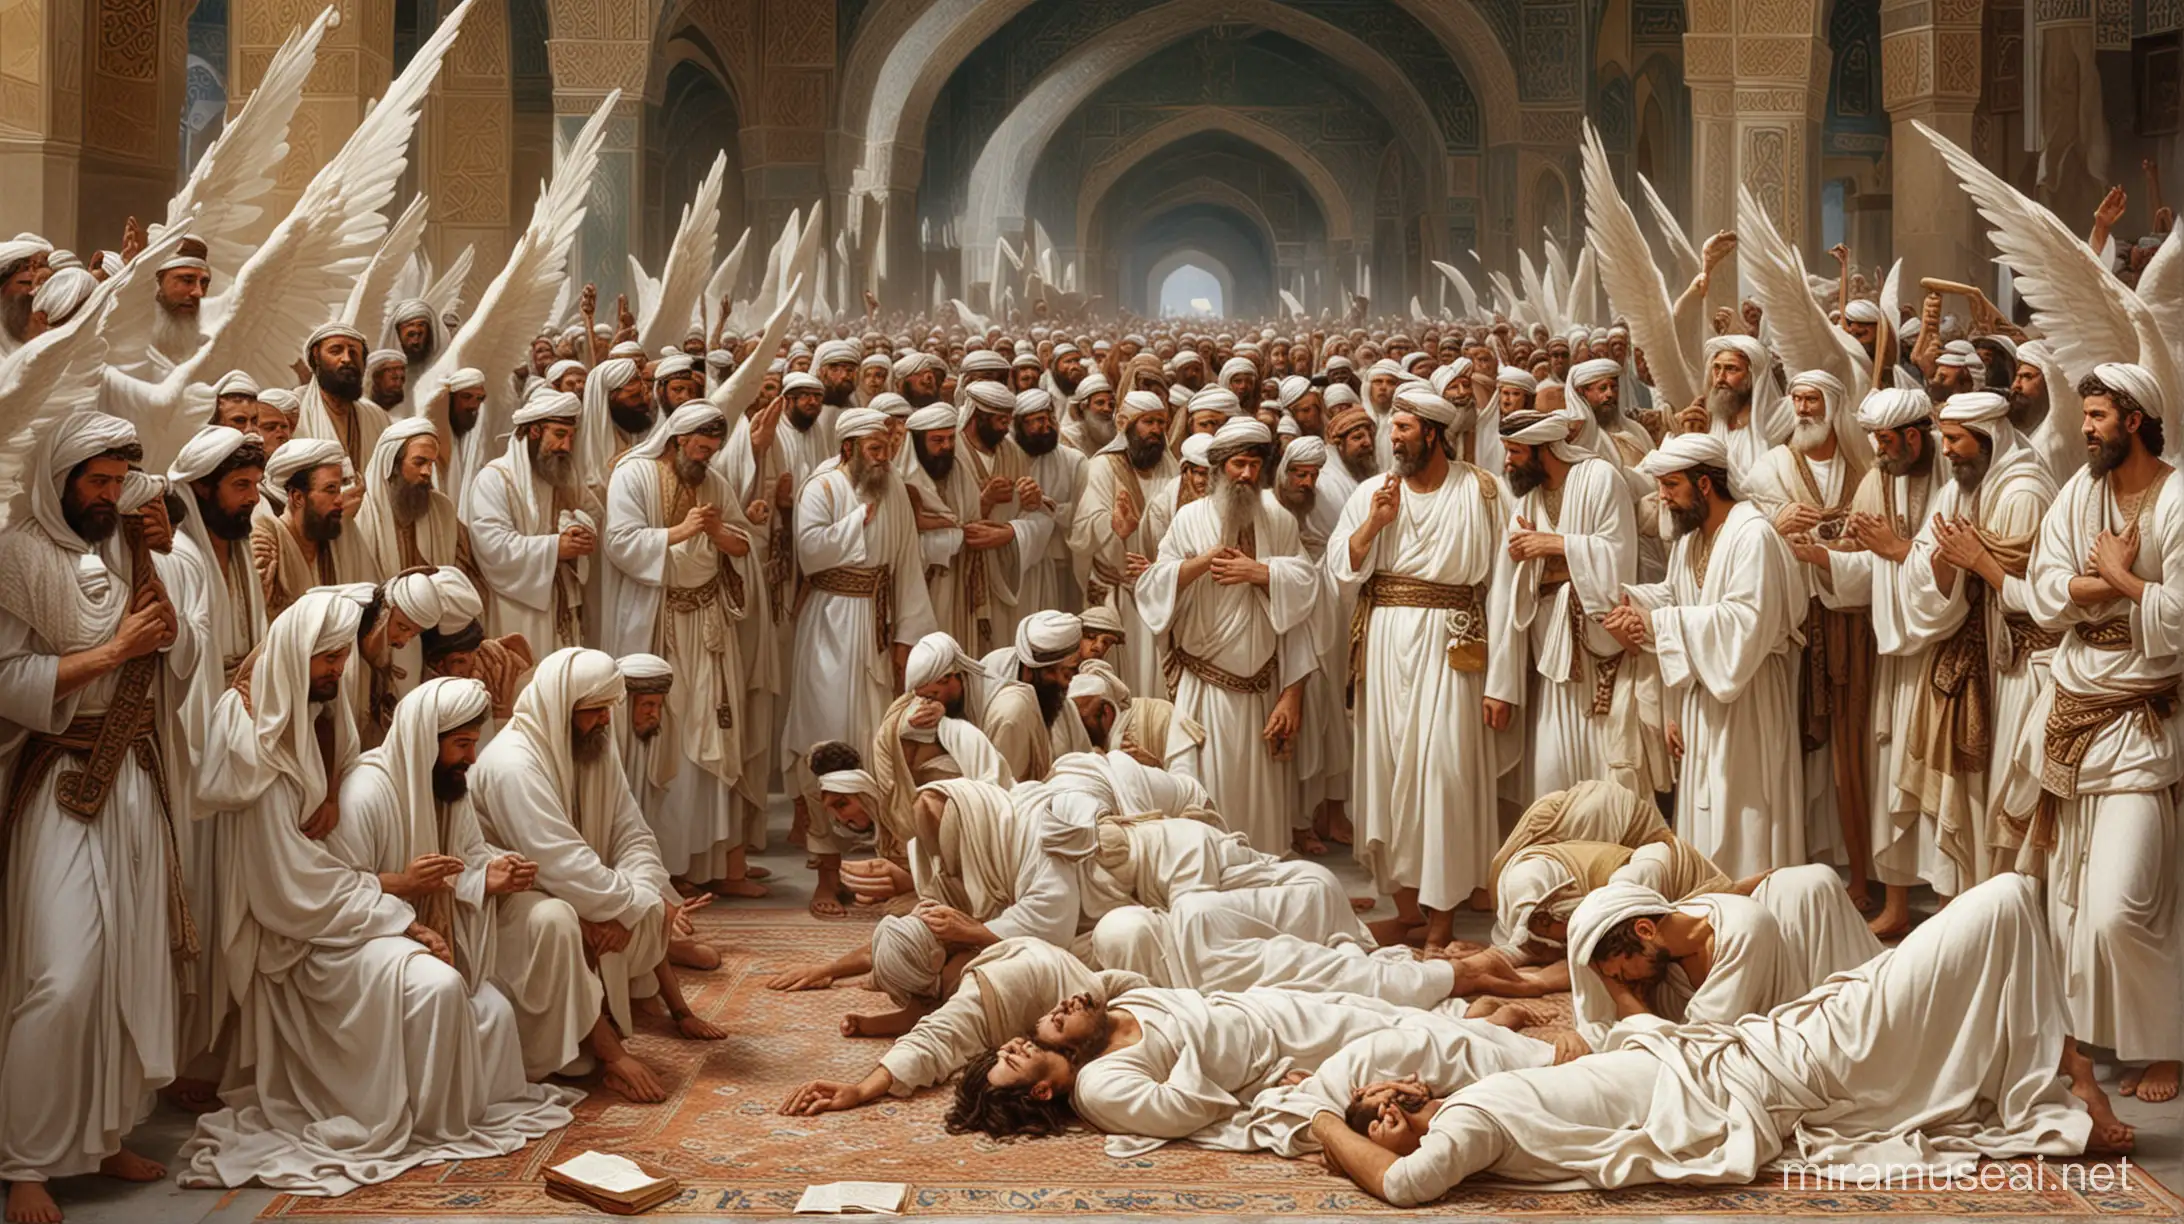 Once Adam was complete, Allah commanded the angels to show him respect by prostrating before him. It wasn't worship, but an acknowledgement of Adam's unique place as the first human being. However, there was one who refused: Iblees, also known as Satan. Filled with arrogance, he saw himself as superior. This act of disobedience marked the beginning of his rebellion..